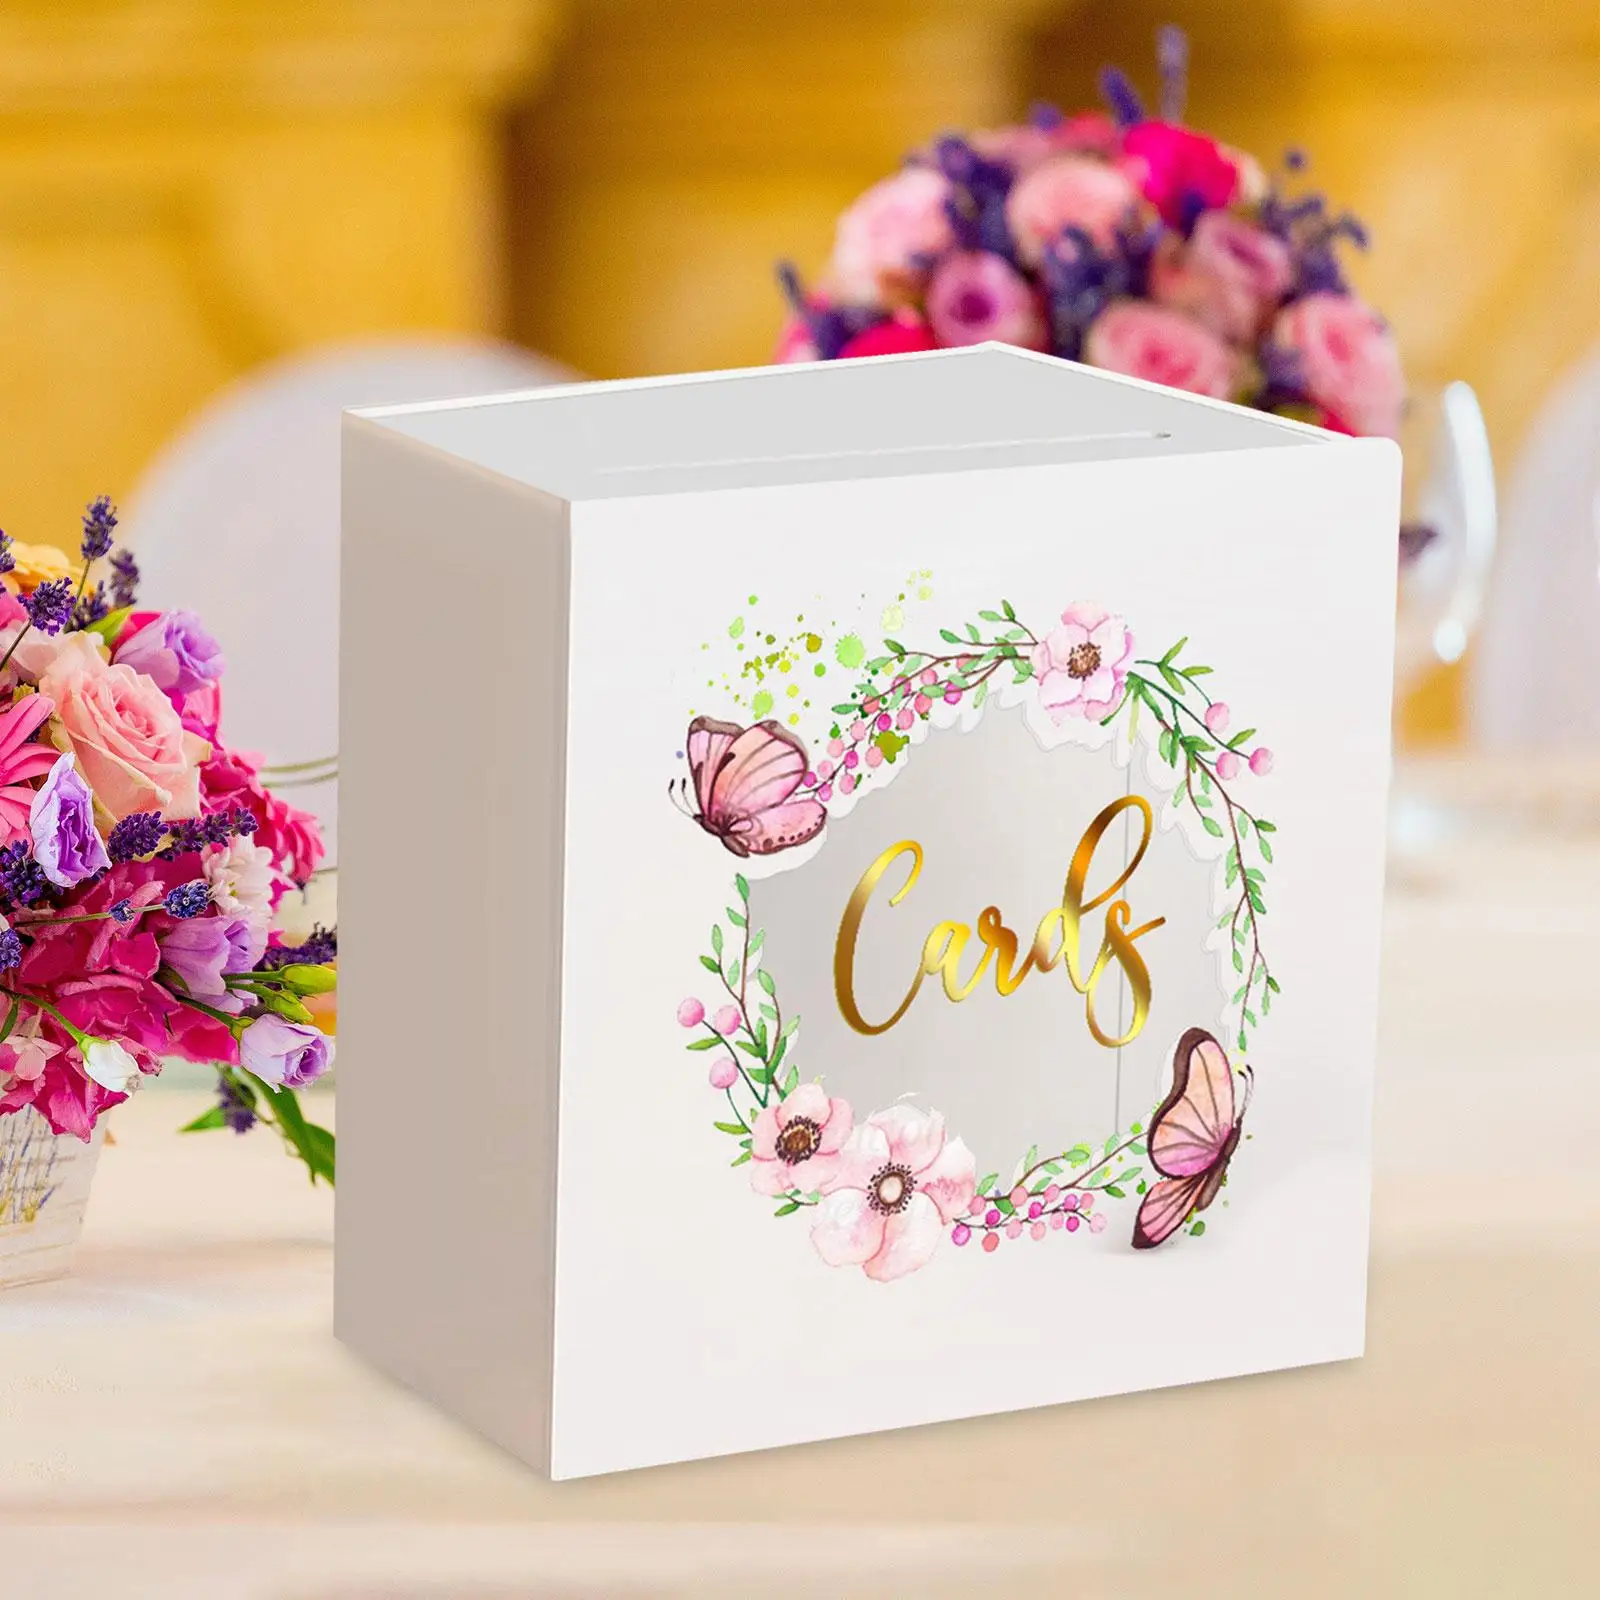 Wedding Acrylic Card Box with Slot Floral Print Durable Elegant Modern Exquisite Envelope Card Holder for Party Money Box